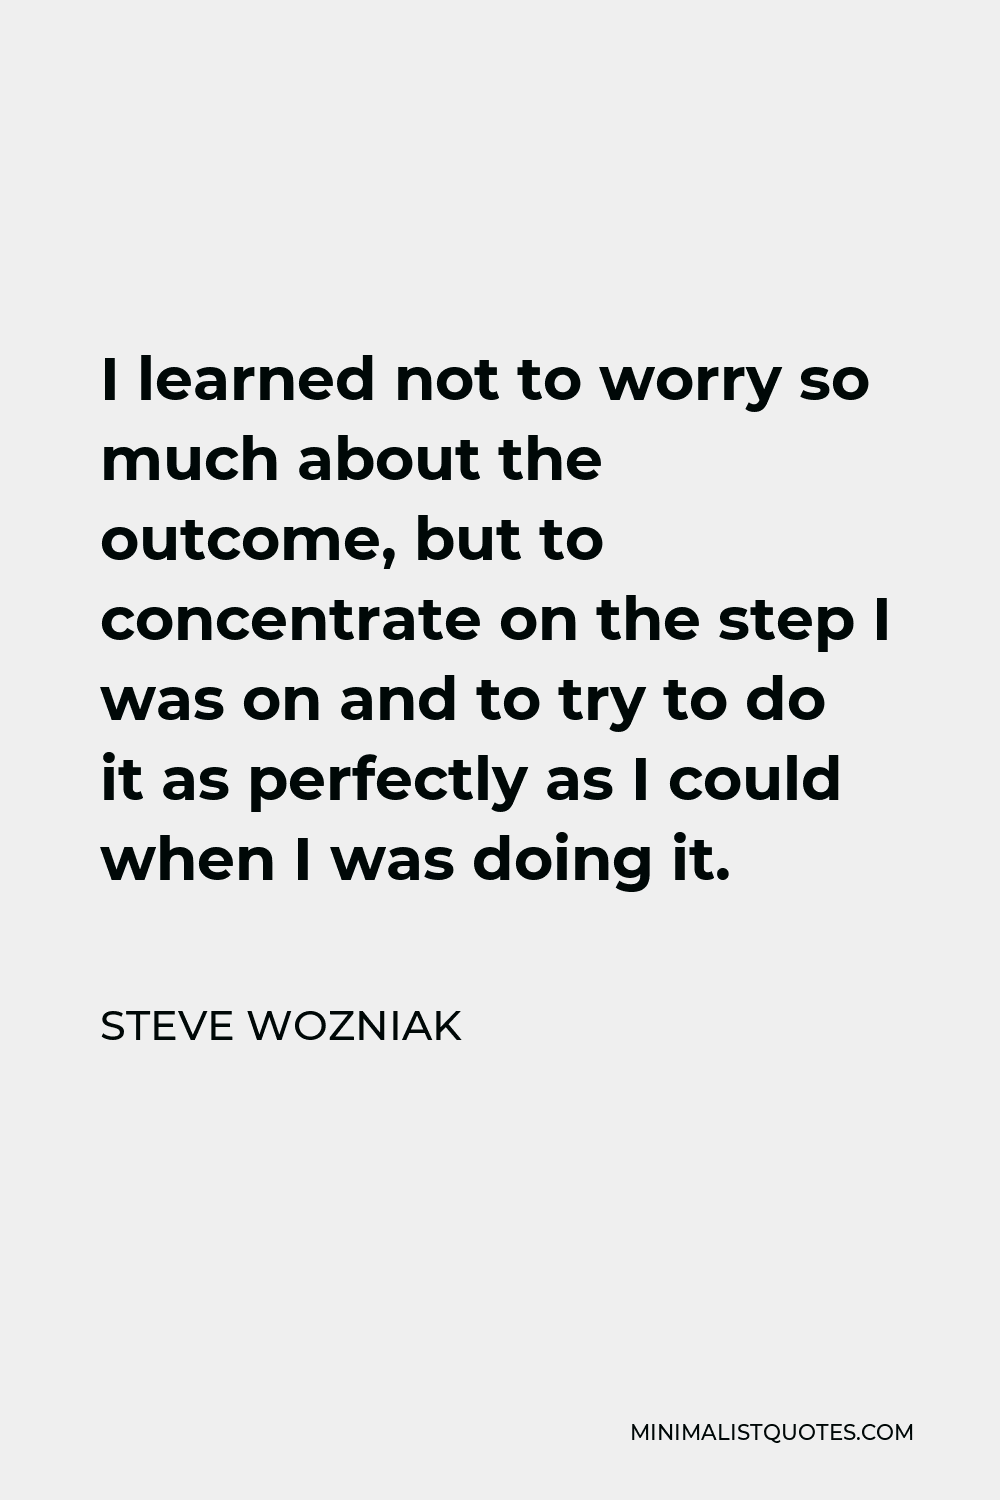 Steve Wozniak Quote - I learned not to worry so much about the outcome, but to concentrate on the step I was on and to try to do it as perfectly as I could when I was doing it.